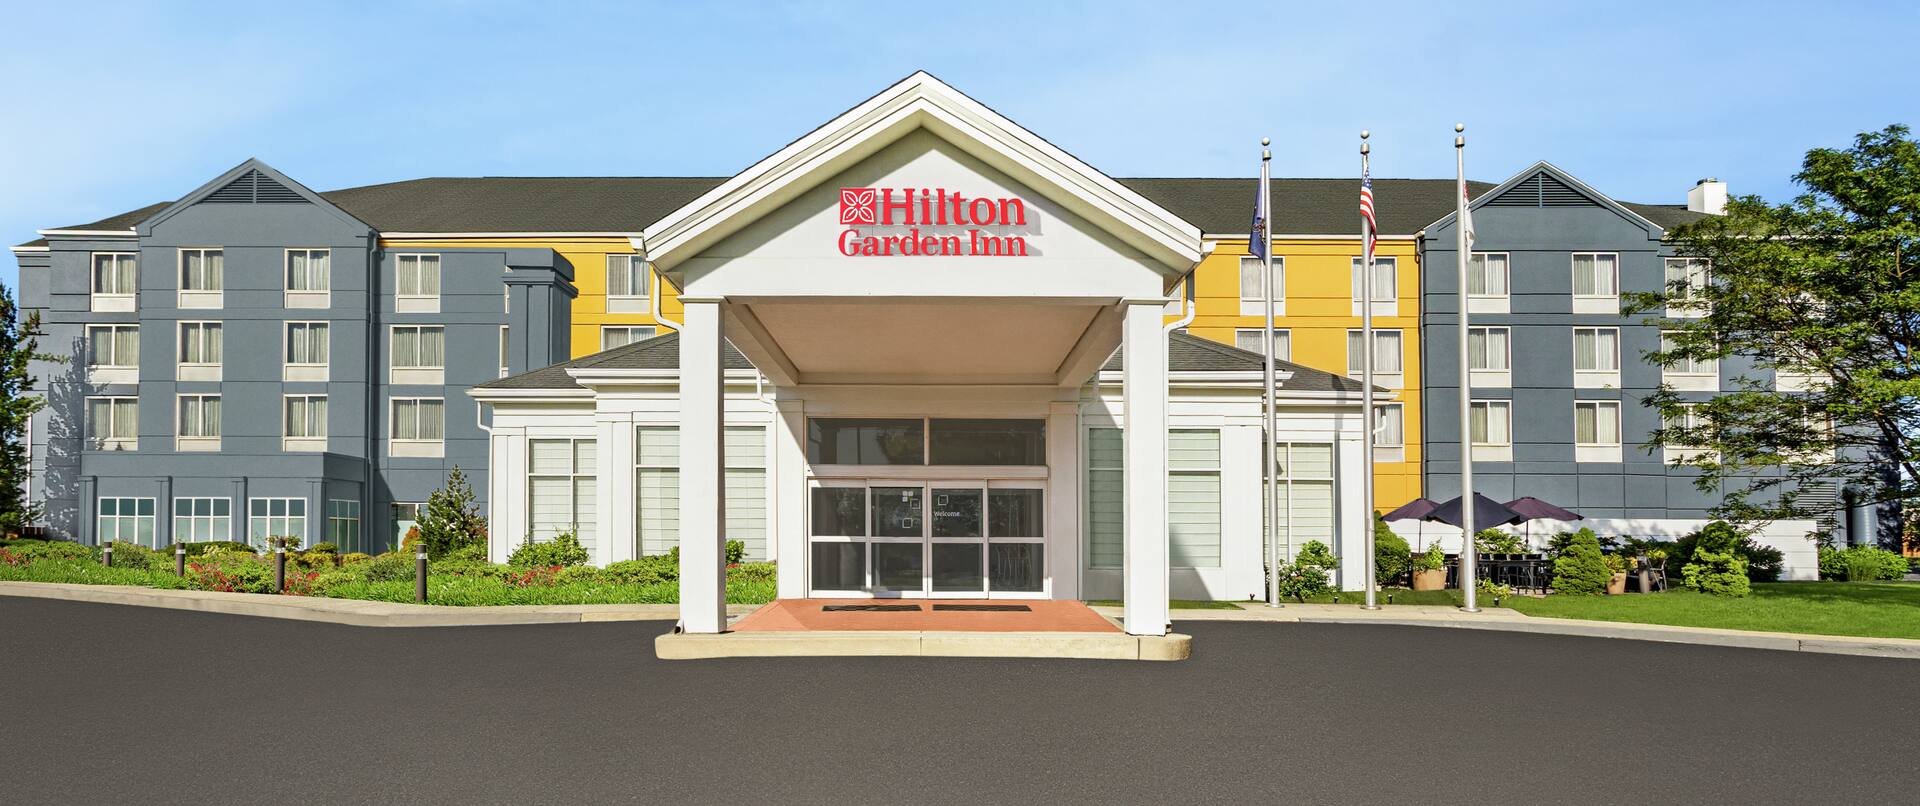 Welcoming Hilton Garden Inn hotel exterior featuring eye-catching design, lush landscaping, and blue sky.